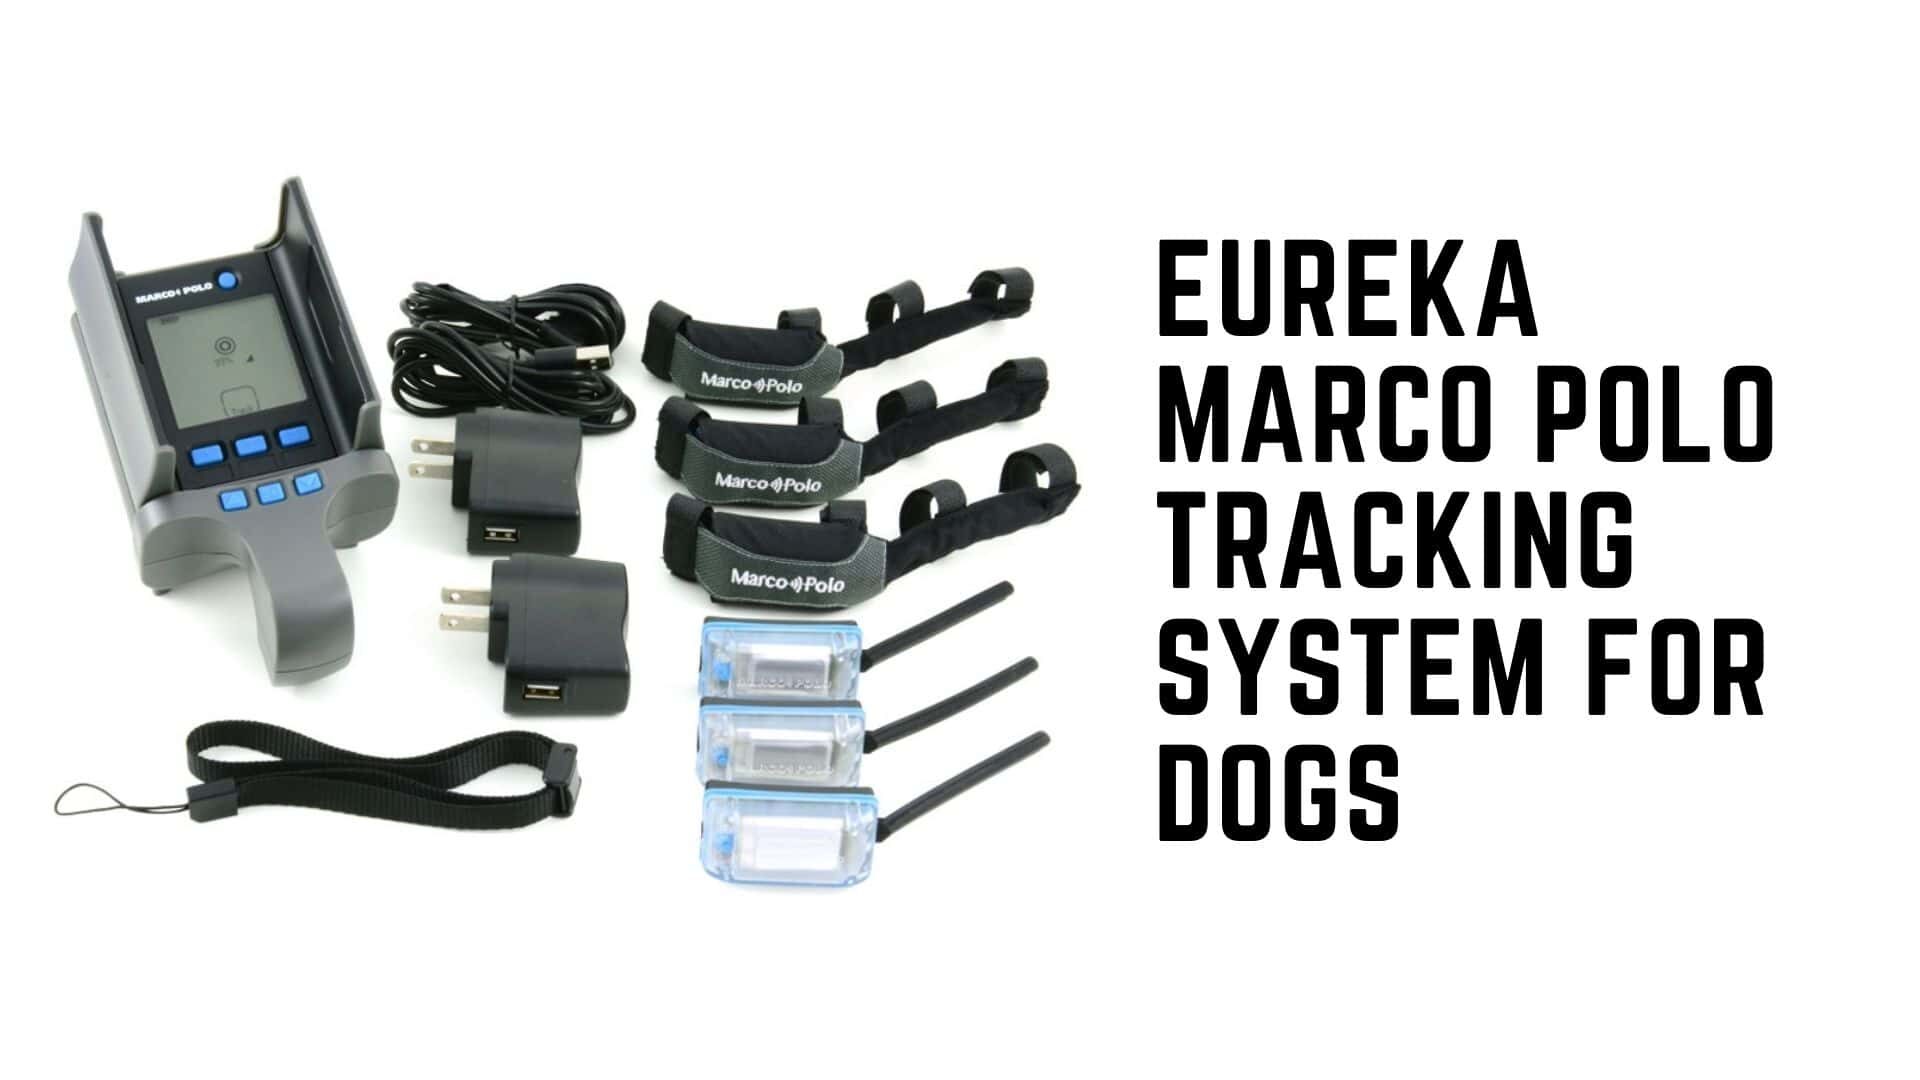 Eureka Marco Polo Tracking System for Dogs